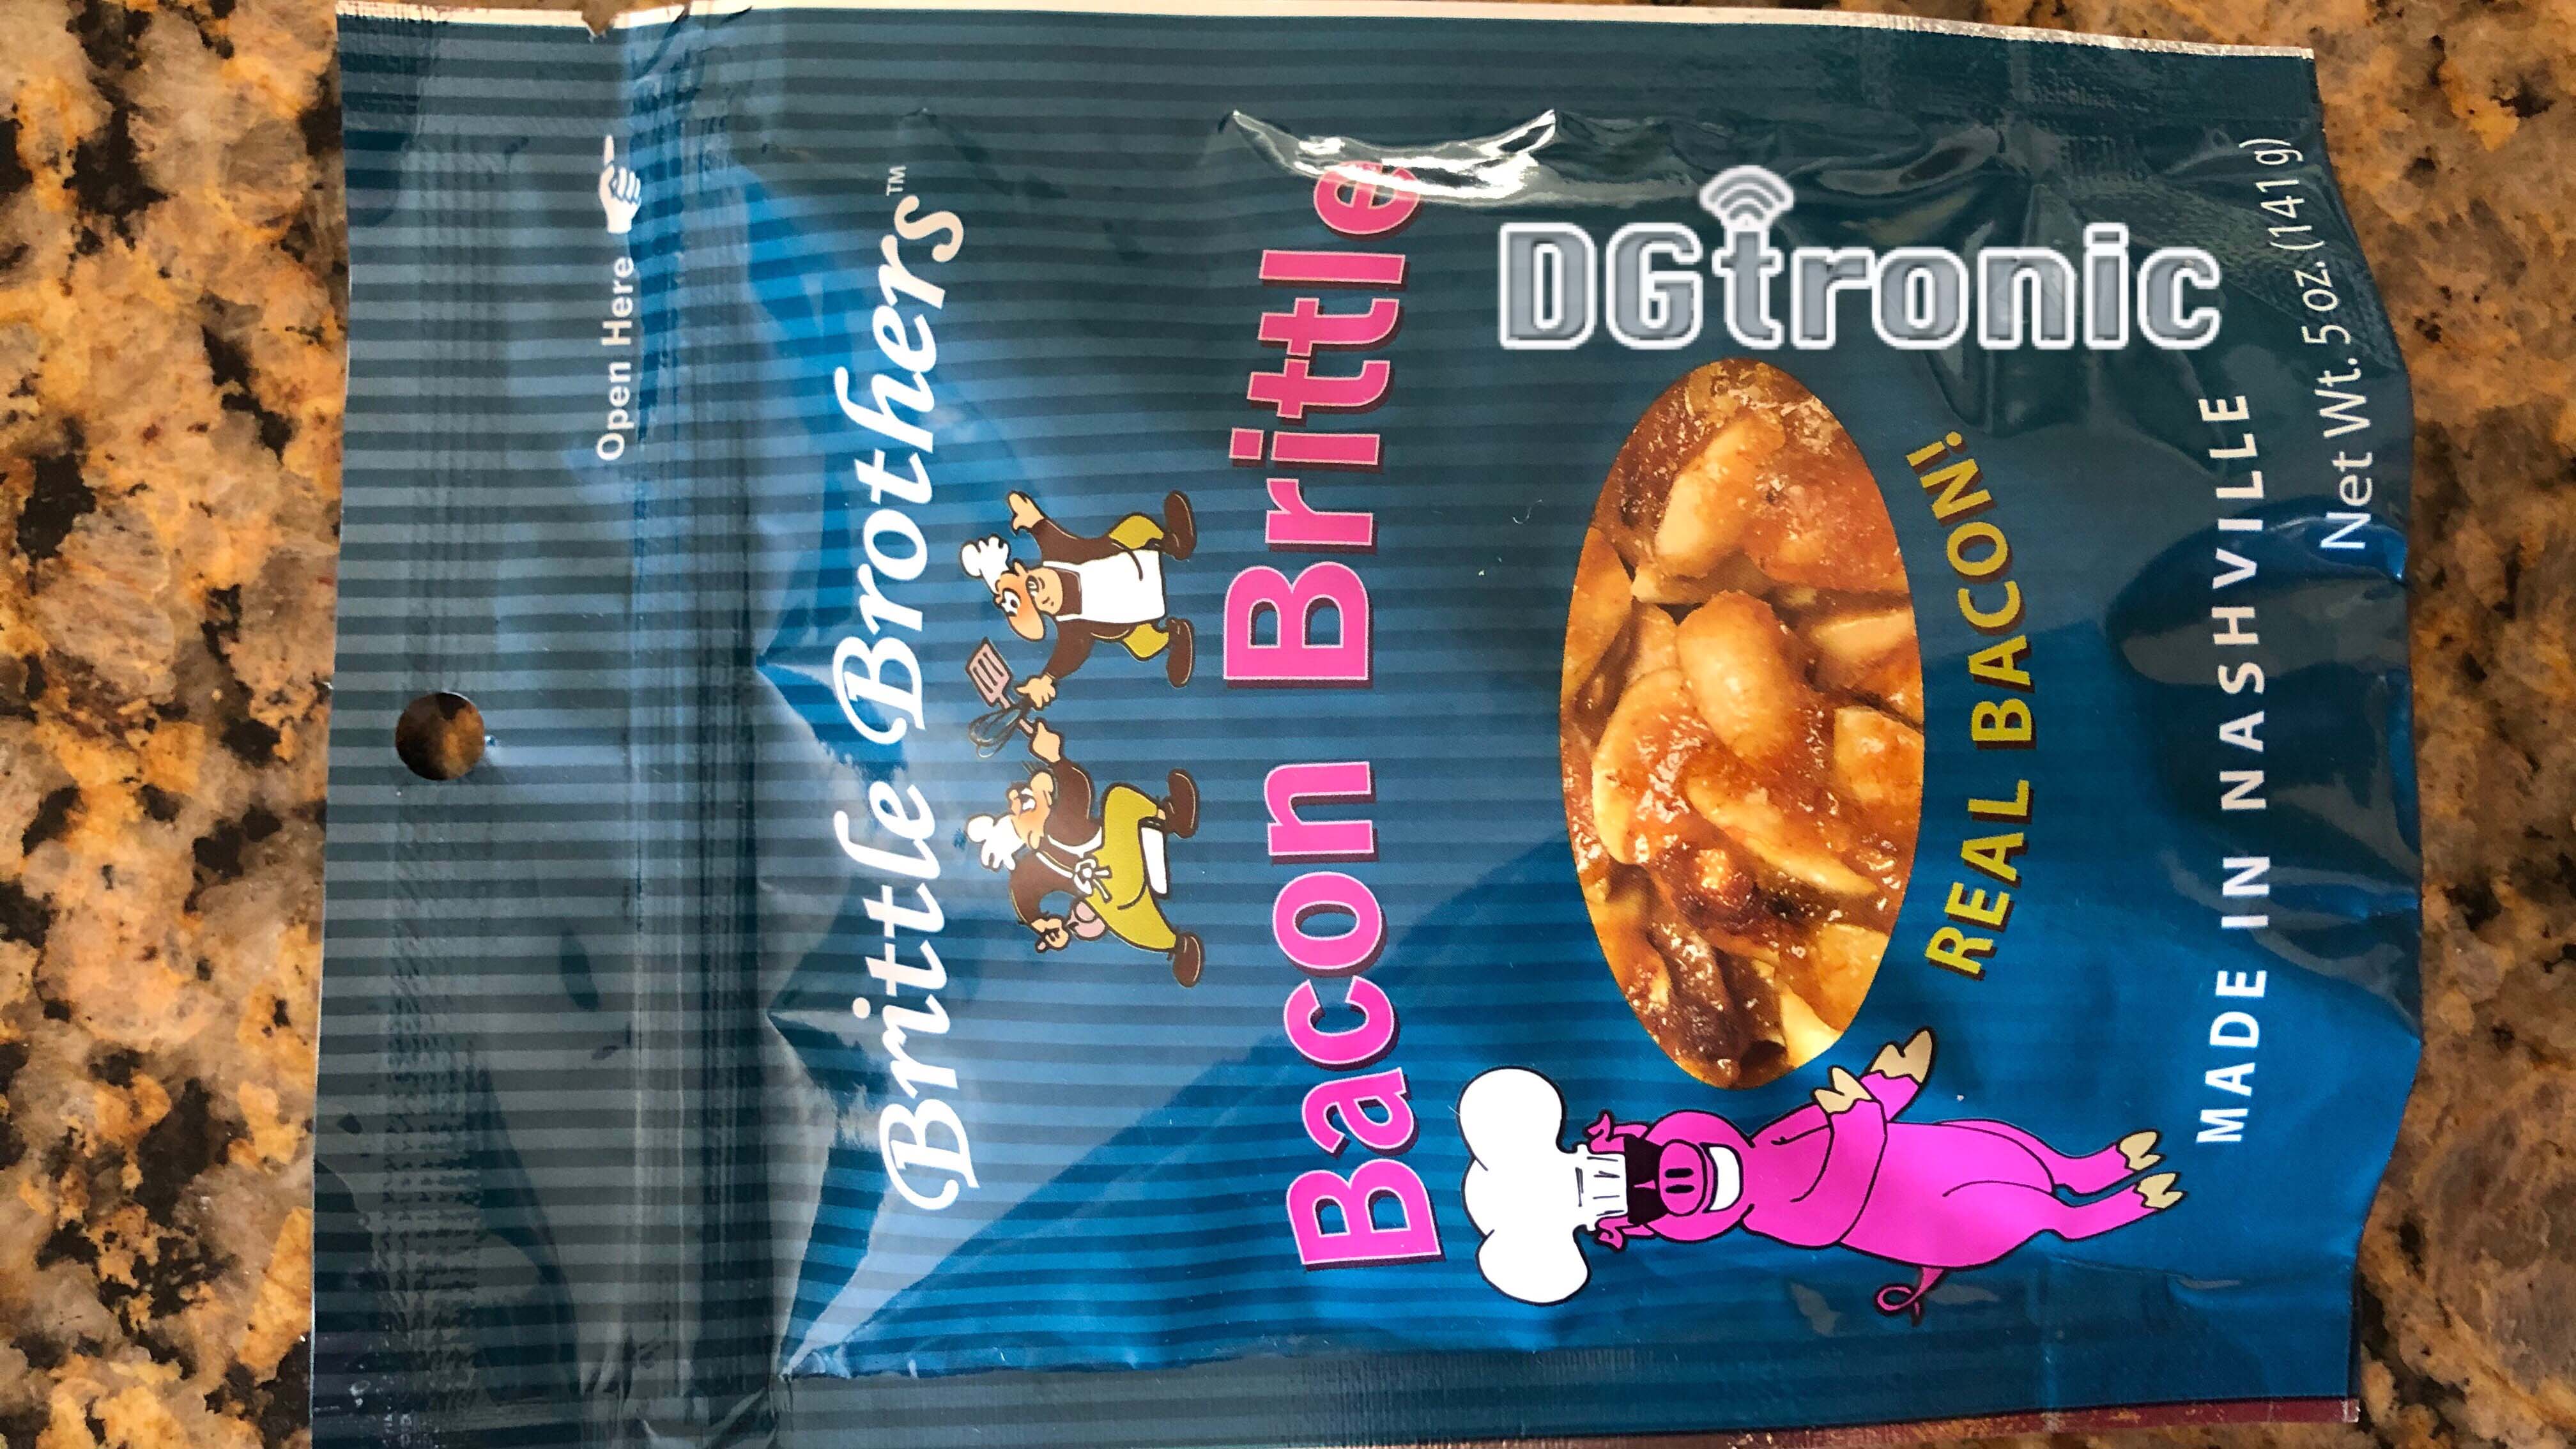 banner - Open Here 6 Brittle Brothers Bacon Brittle DGtronic Real Baco Bacon Made In Nashville Net Wt. 5 oz. 1419